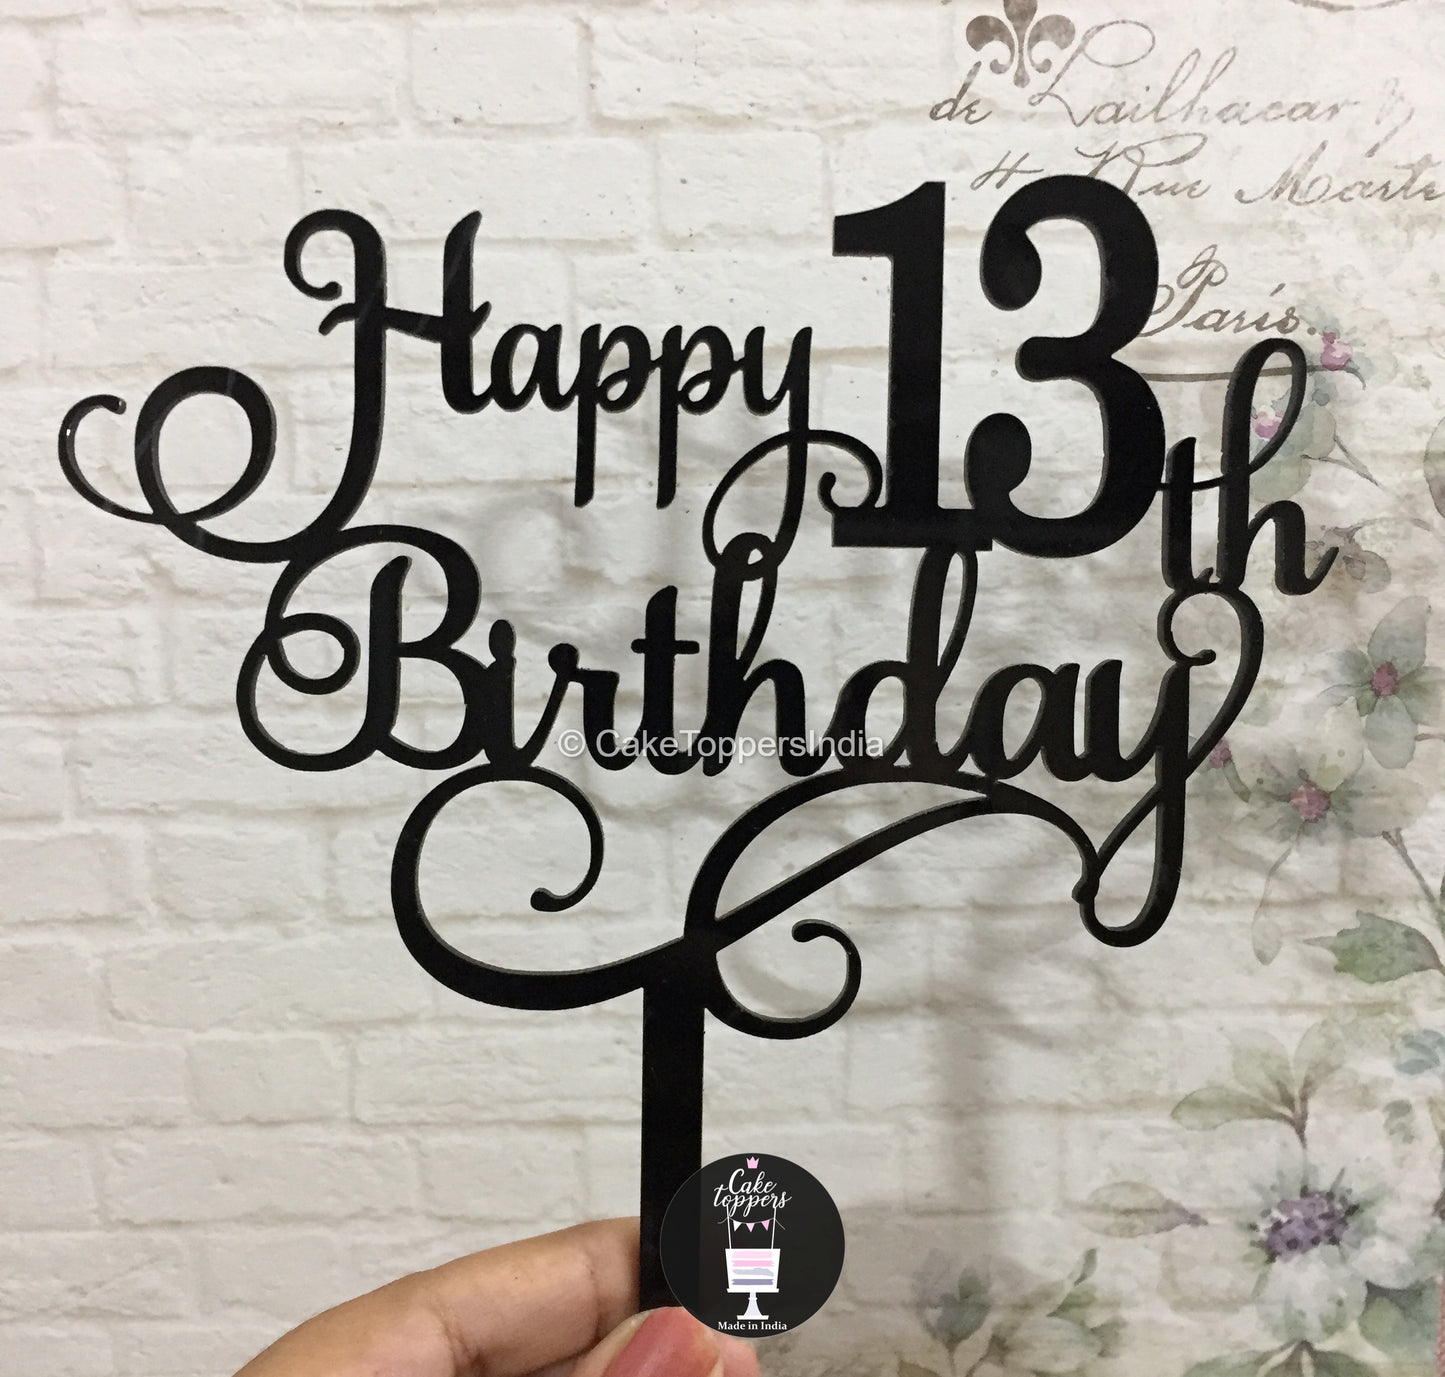 Personalized / Customized Happy Birthday Cake Topper with Age